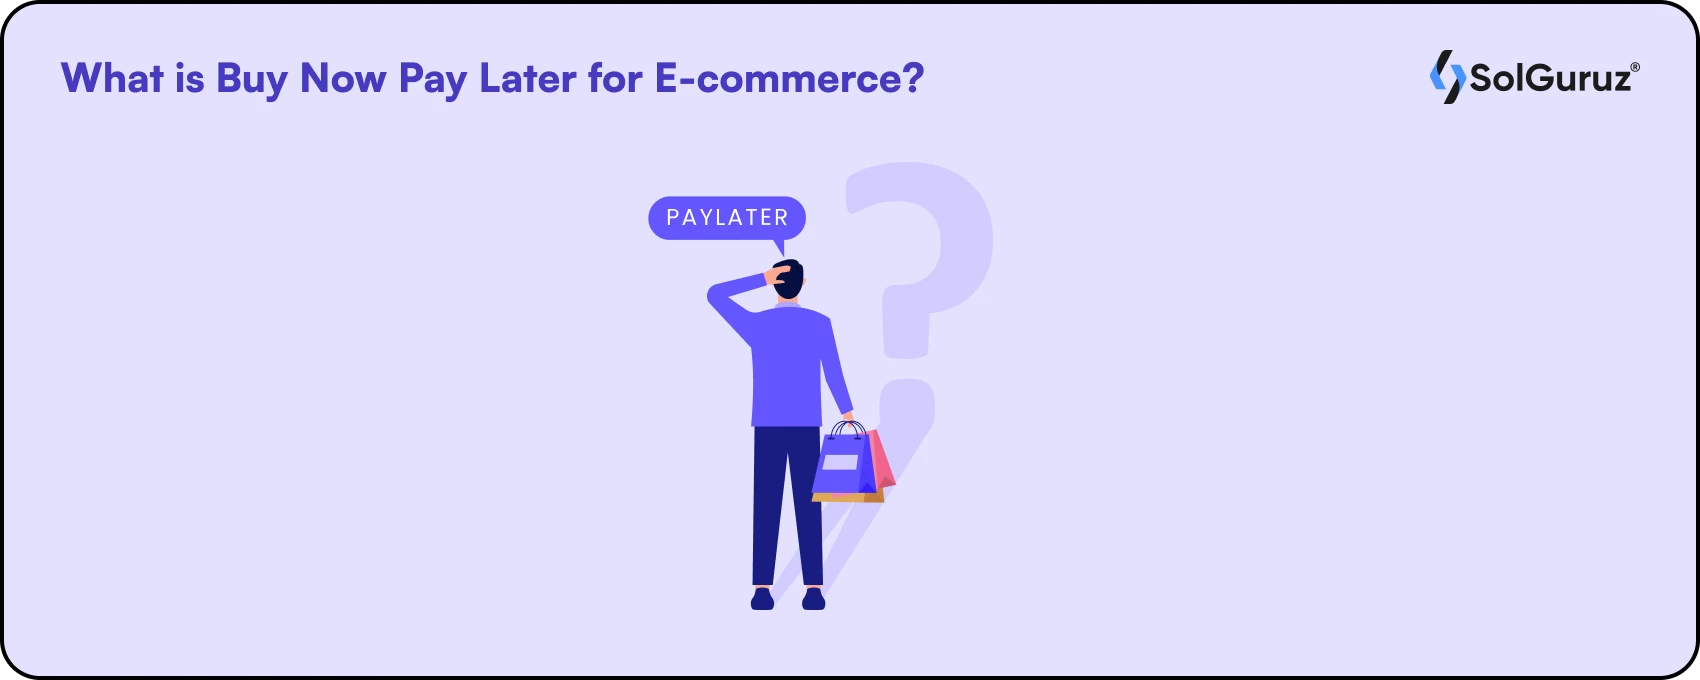 What is Buy Now Pay Later for E-commerce